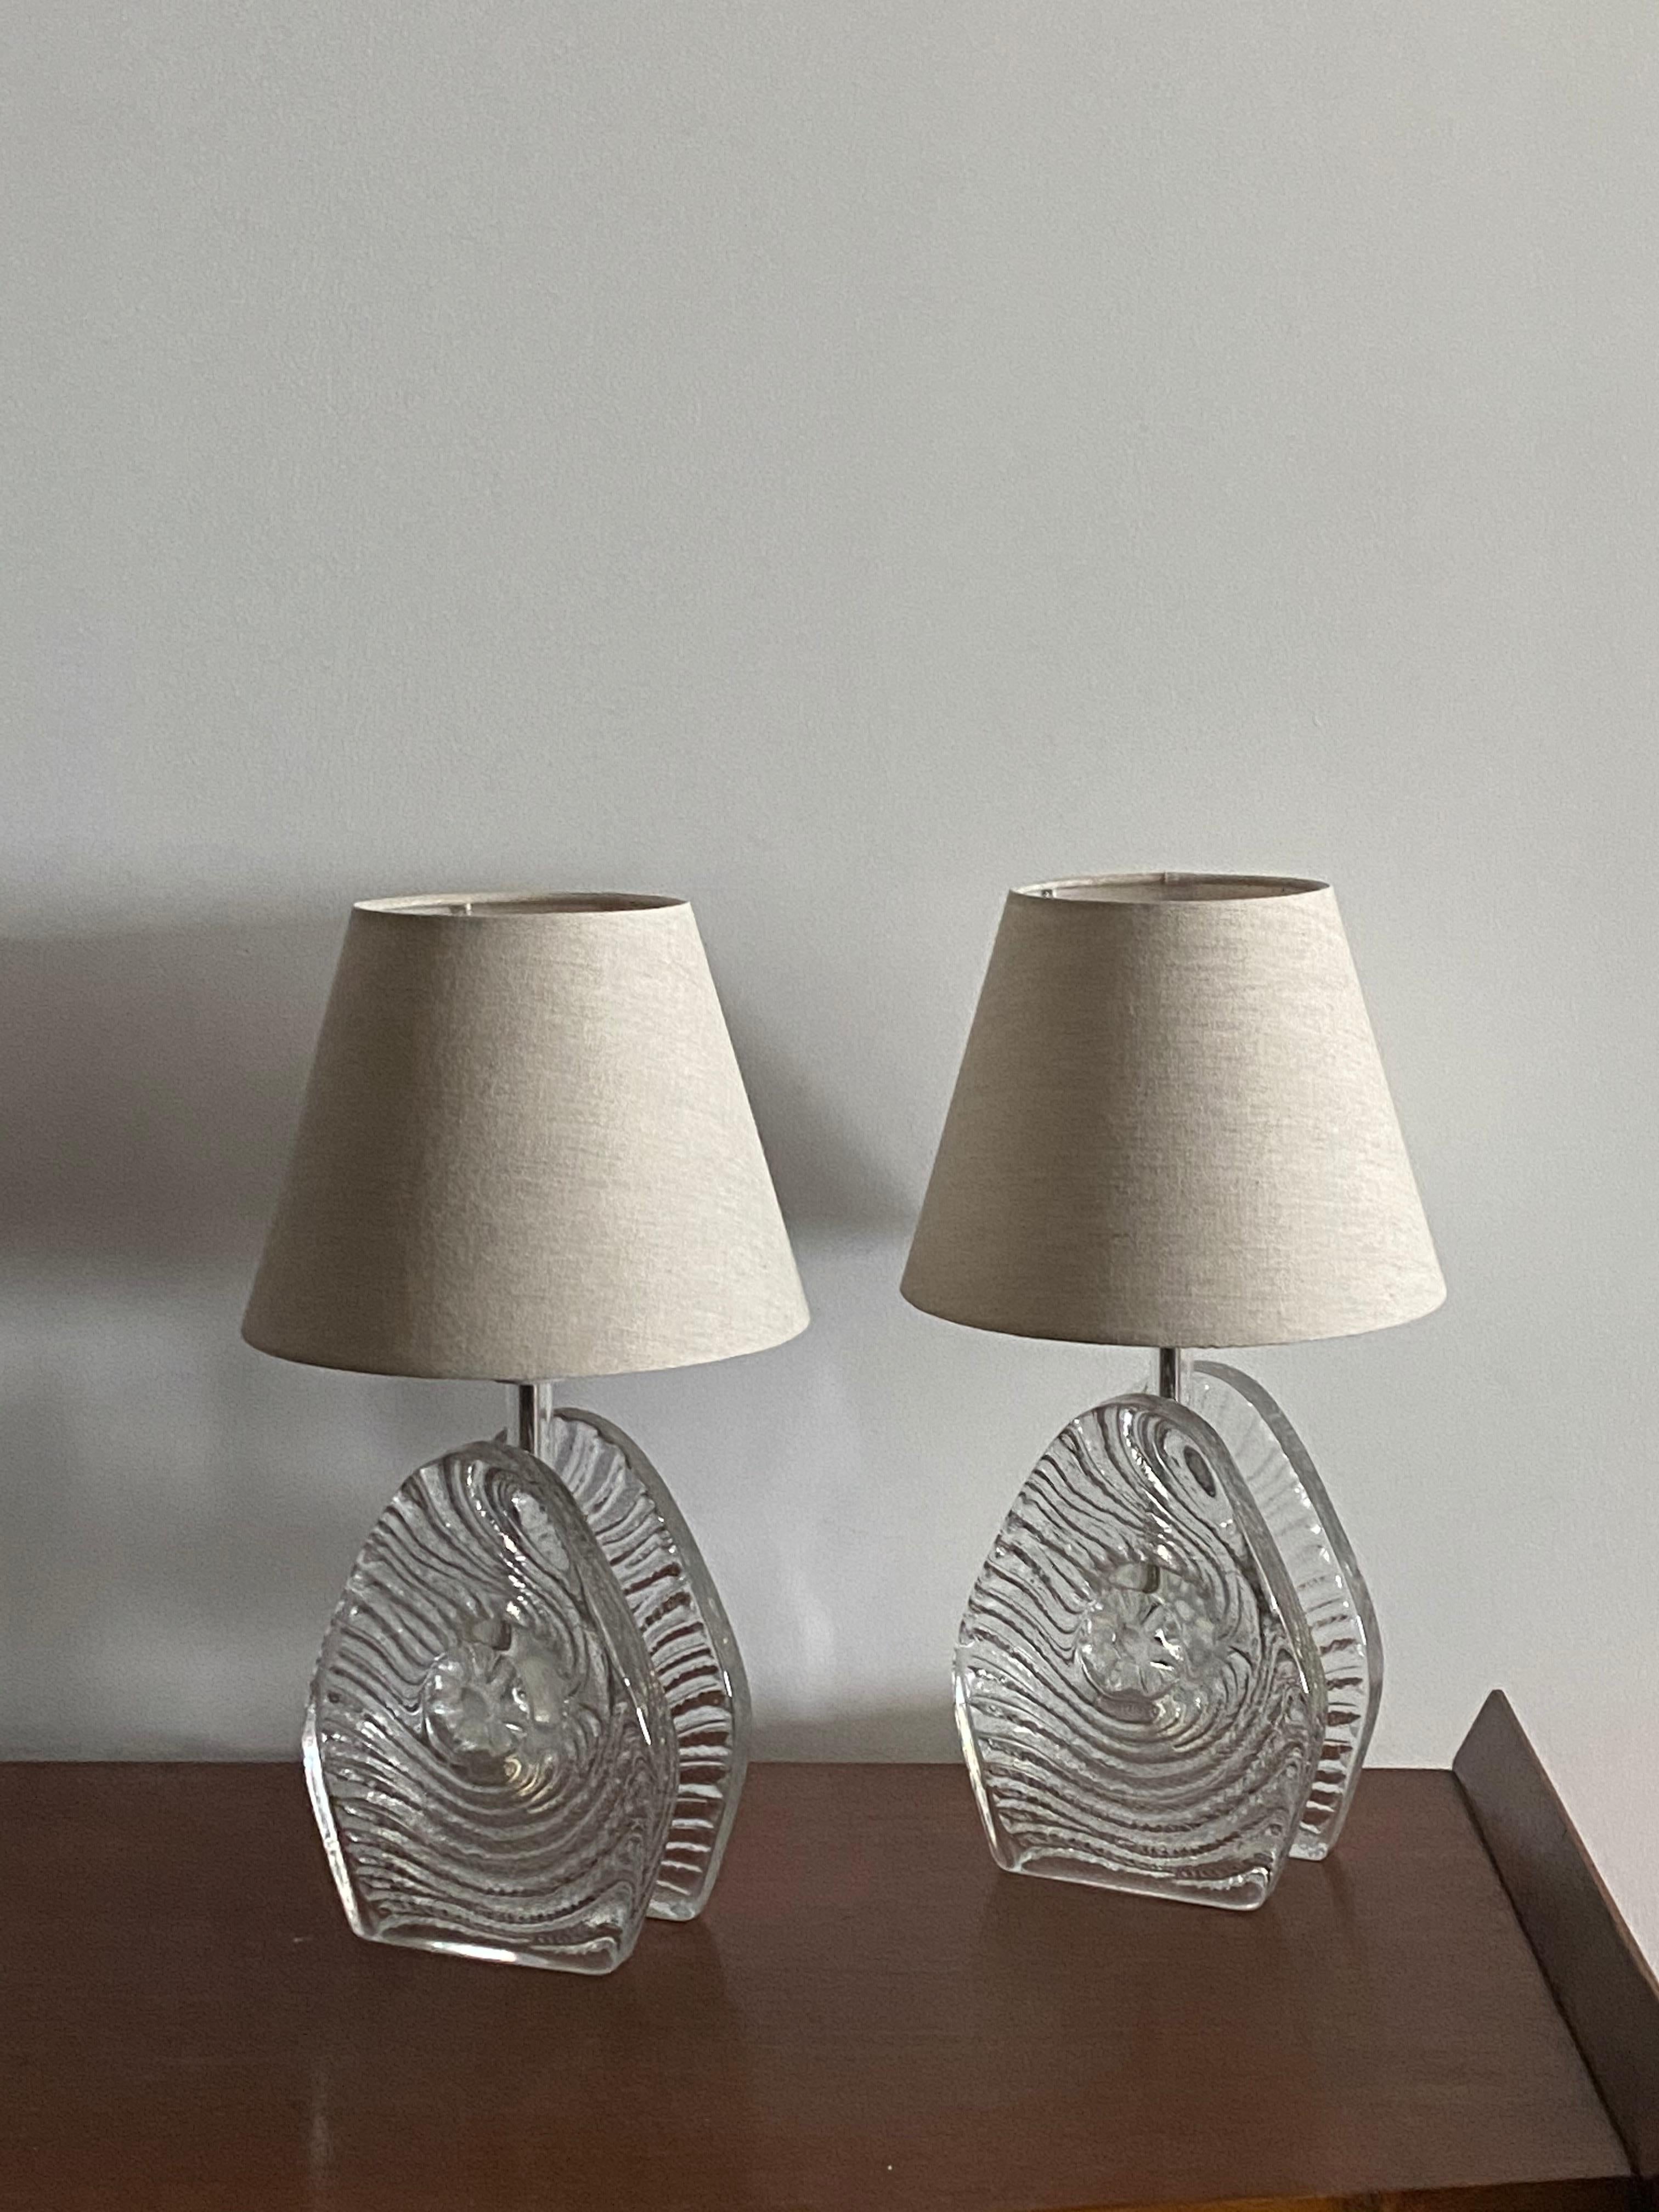 A pair of table lamps, designed and produced by Pukeberg, Sweden, 1960s. Labeled.

Lampshades in image included in purchase on request. 

Other designers of the period include Paavo Tynell, Alvar Aalto, Angelo Lelii, and Max Ingrand.